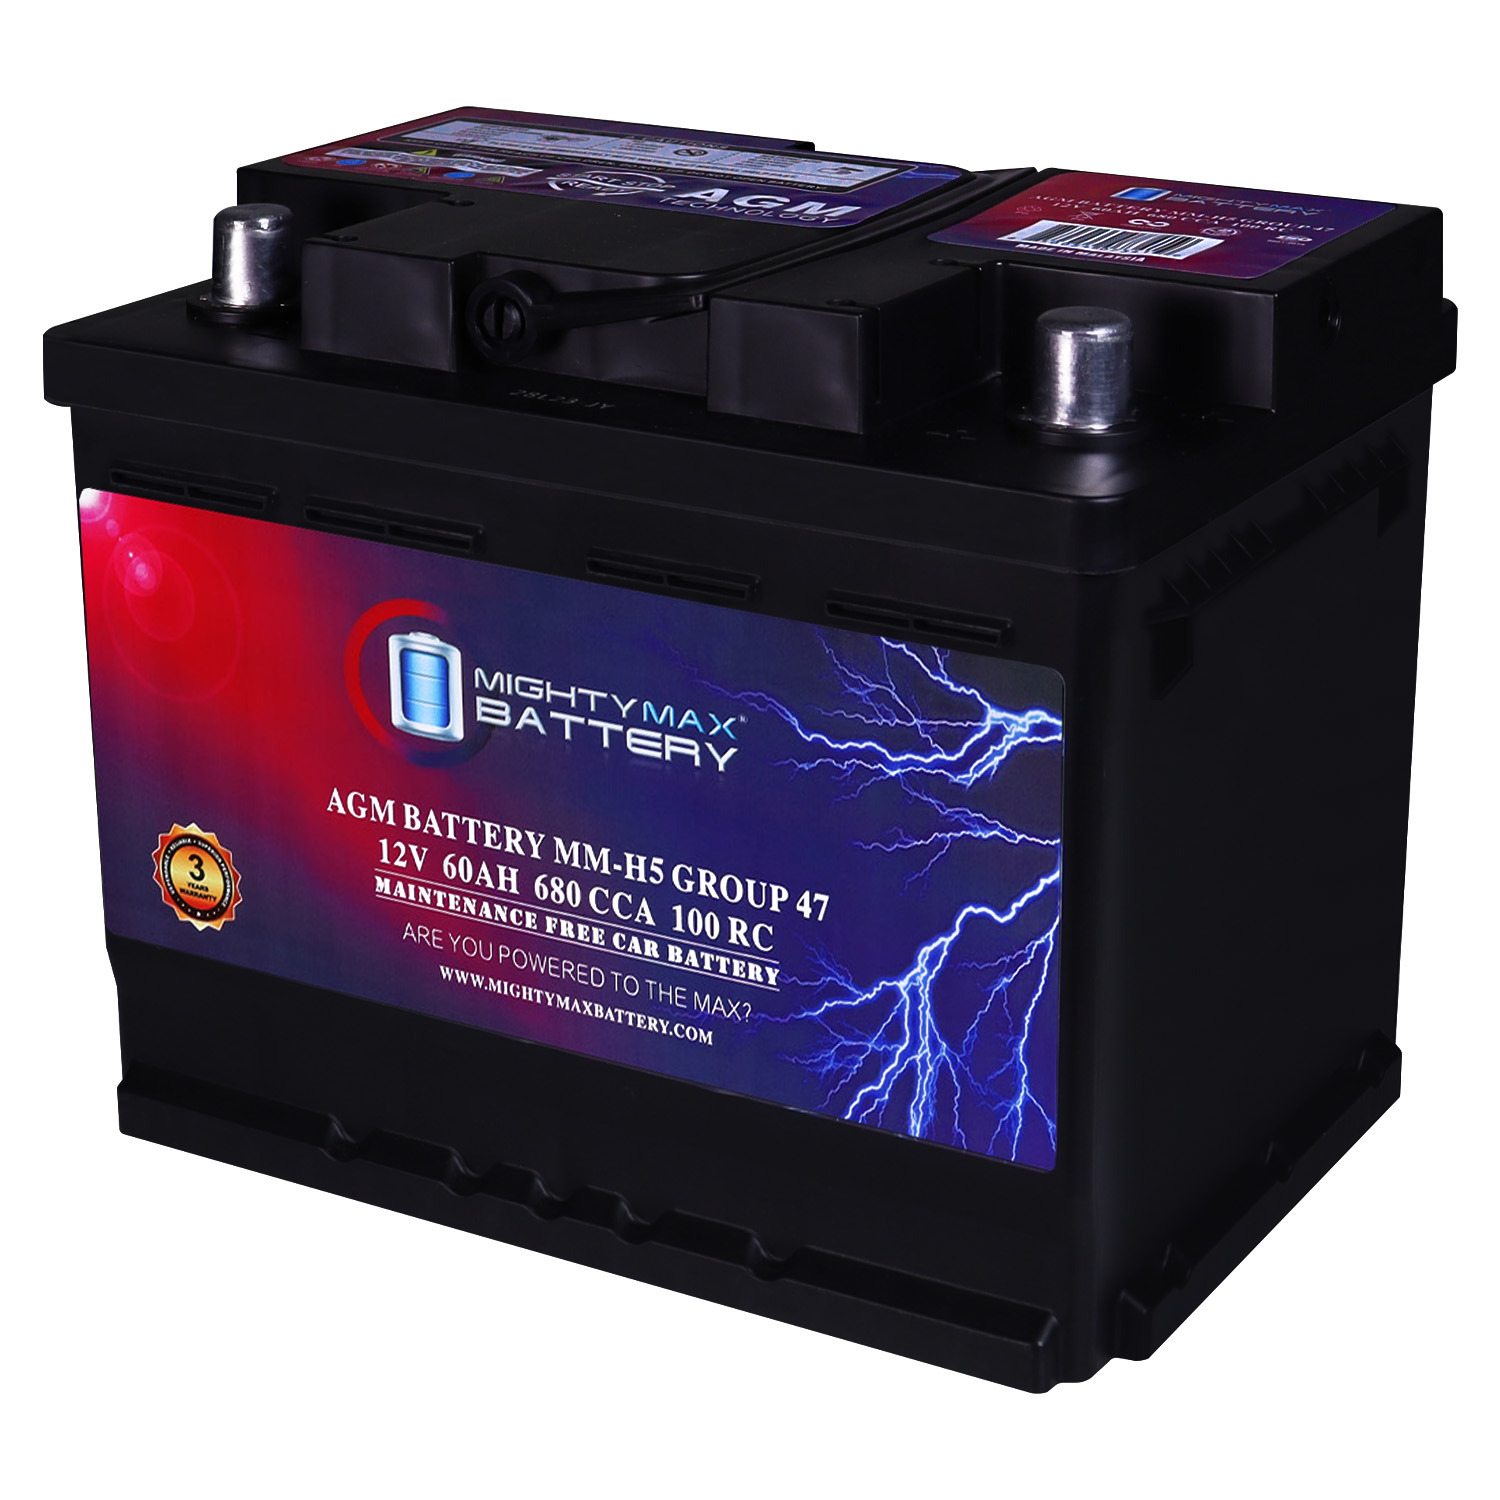 MM-H5 Group 47 12V 60AH 100RC 680CCA Replacement Battery Compatible with Toyota Mirai 21-23